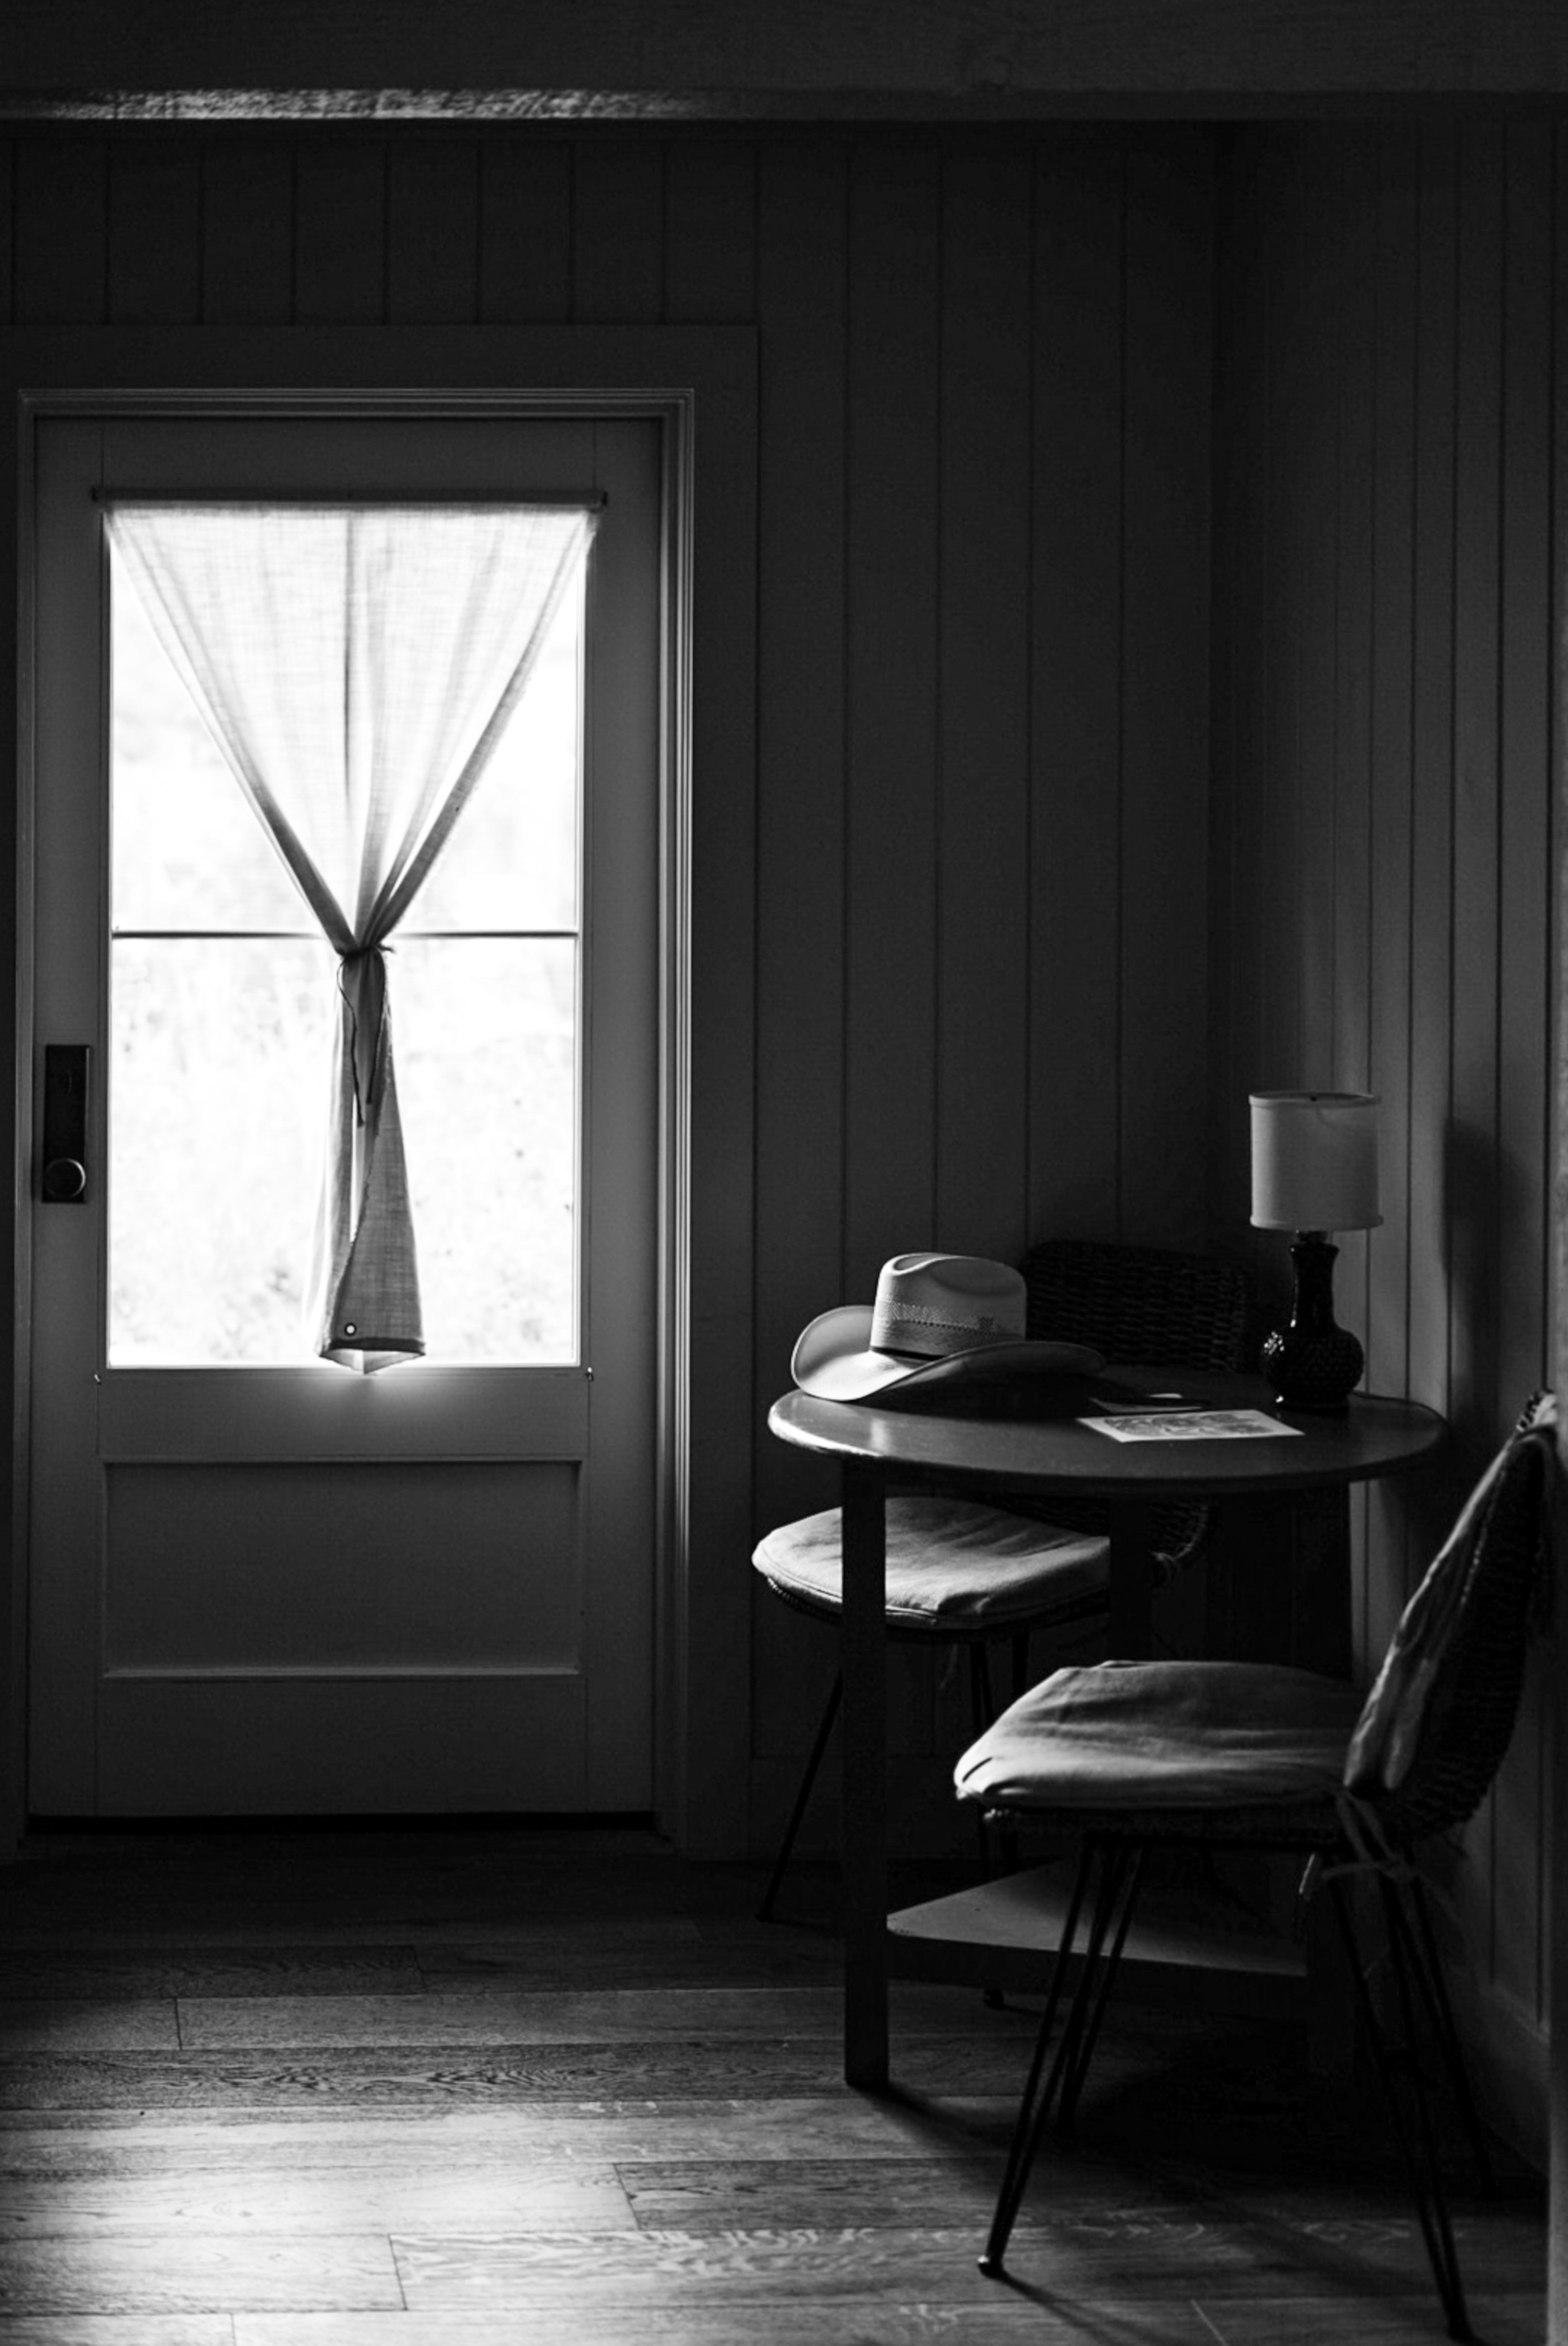 Download background interior, miscellanea, miscellaneous, bw, chb, window, room, armchair